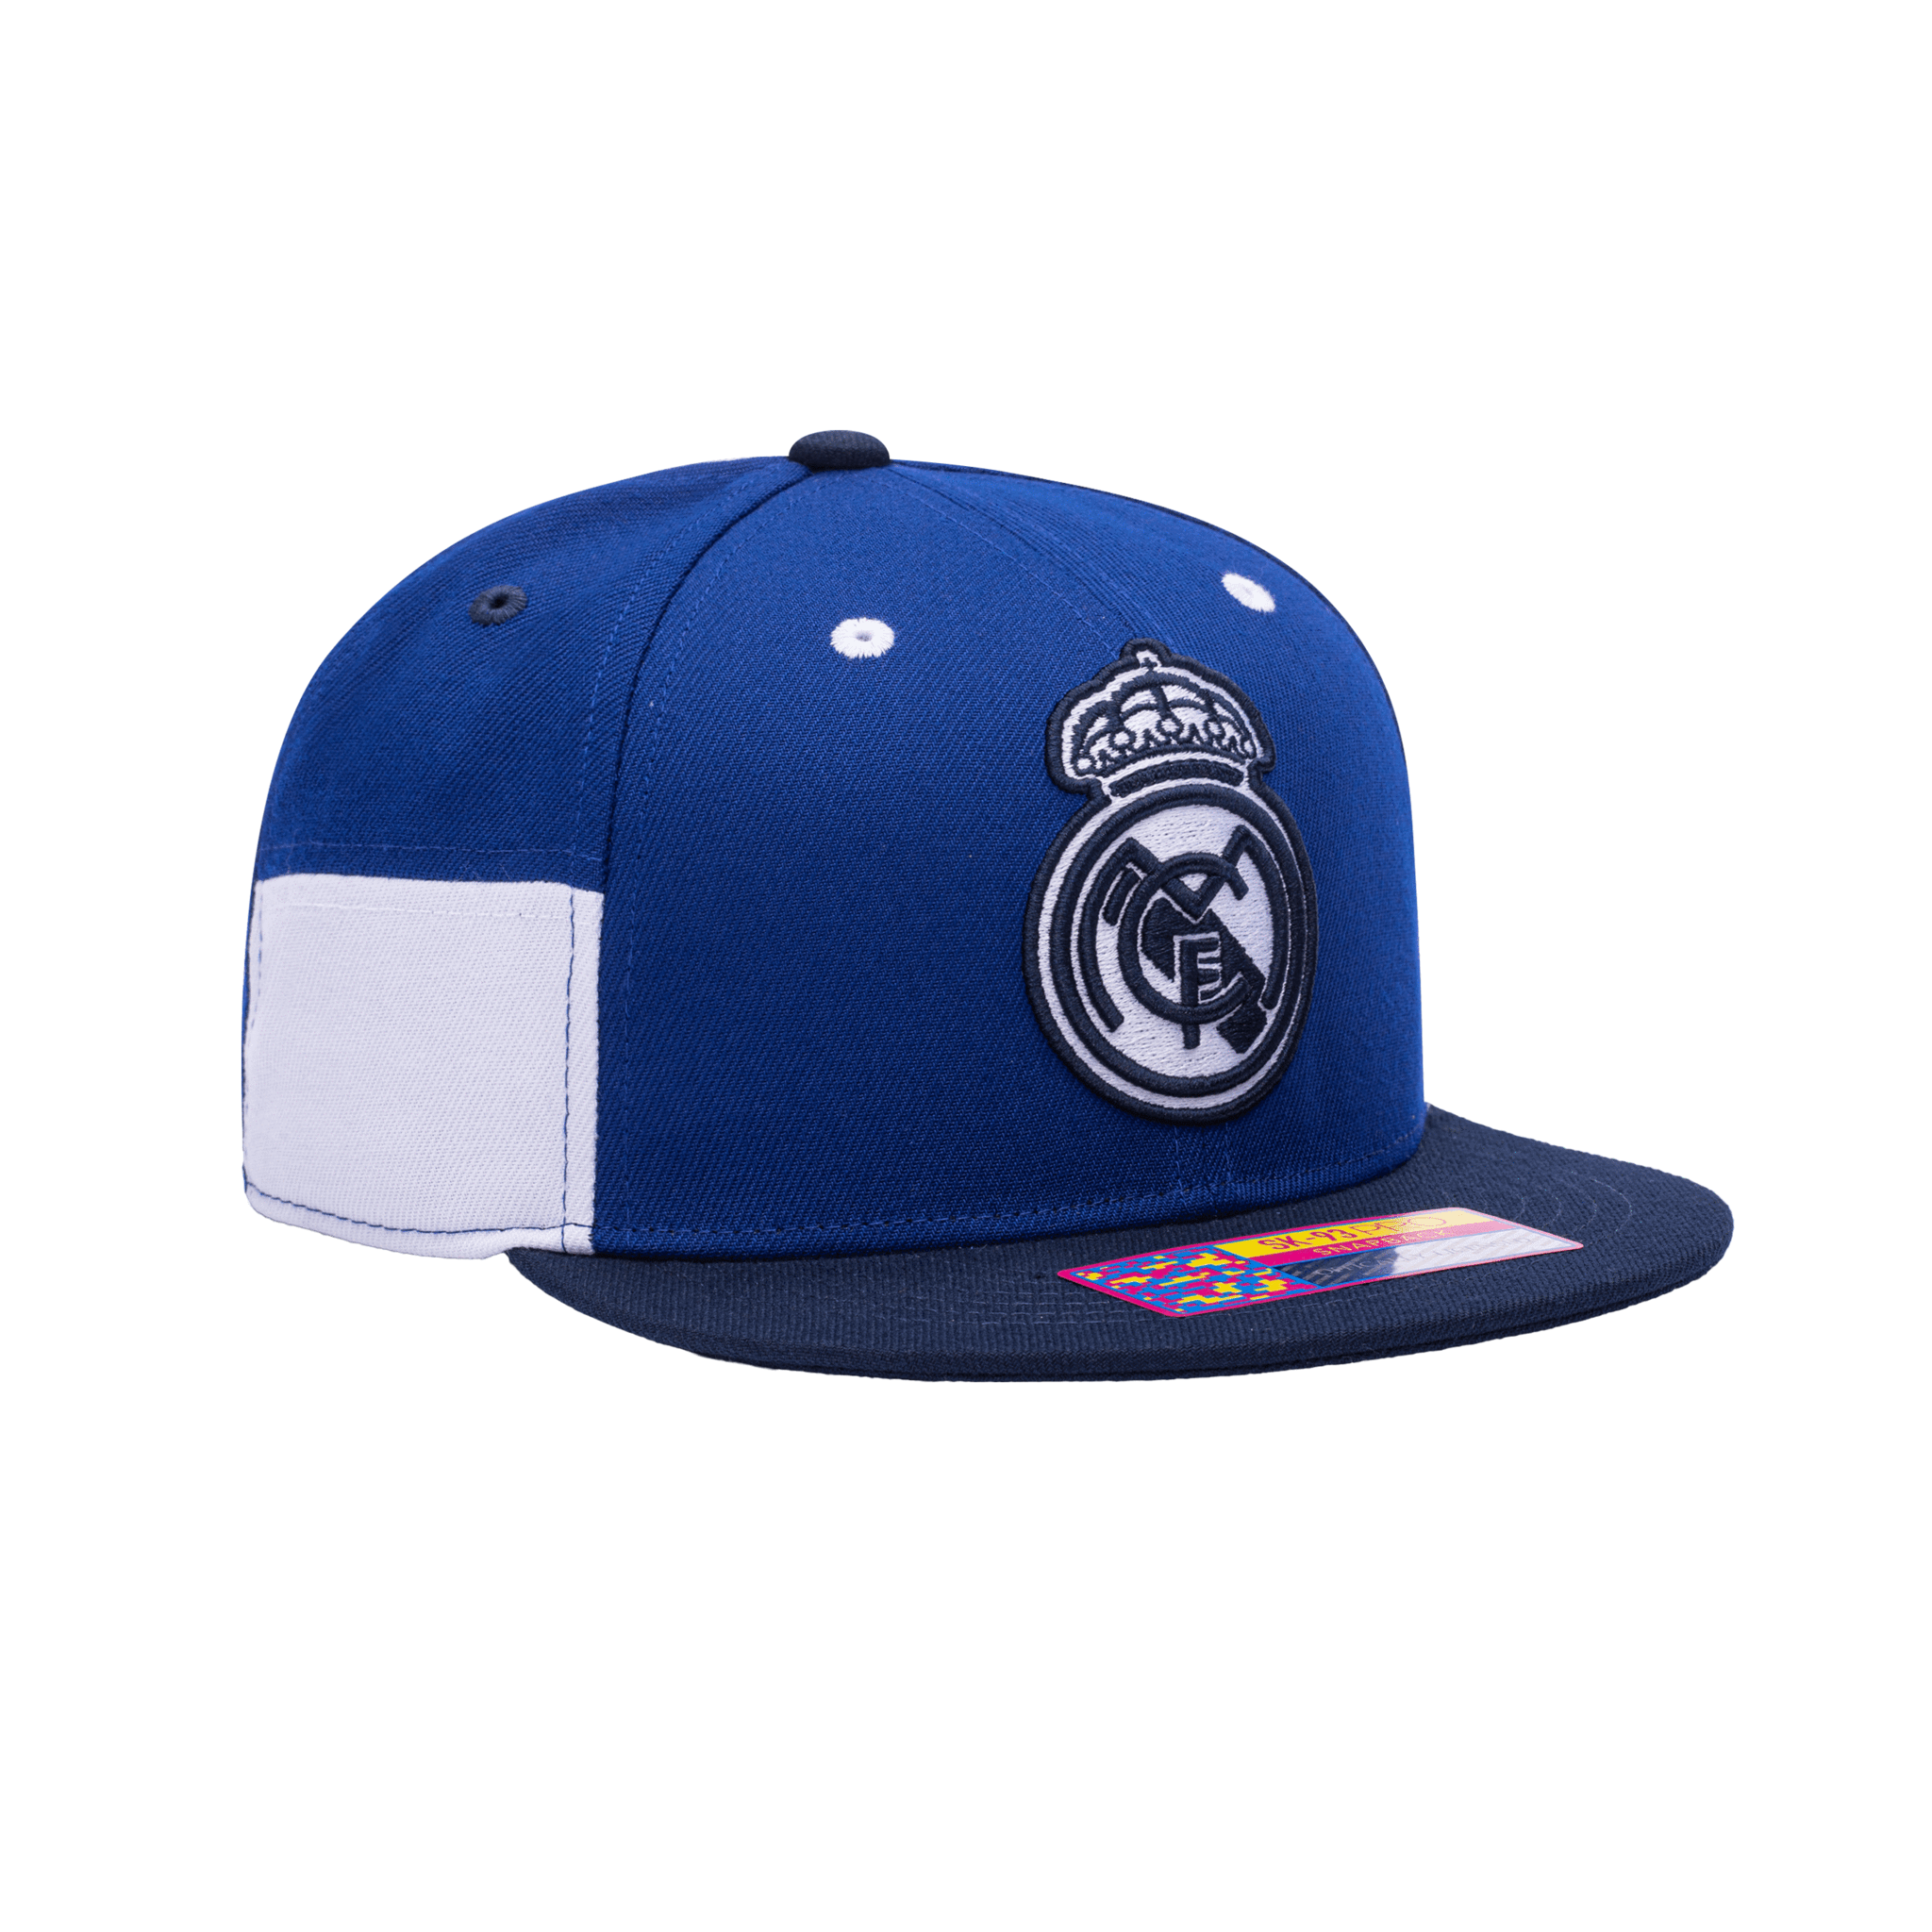 FI COLLECTIONS REAL MADRID TRUITT SNAPBACK